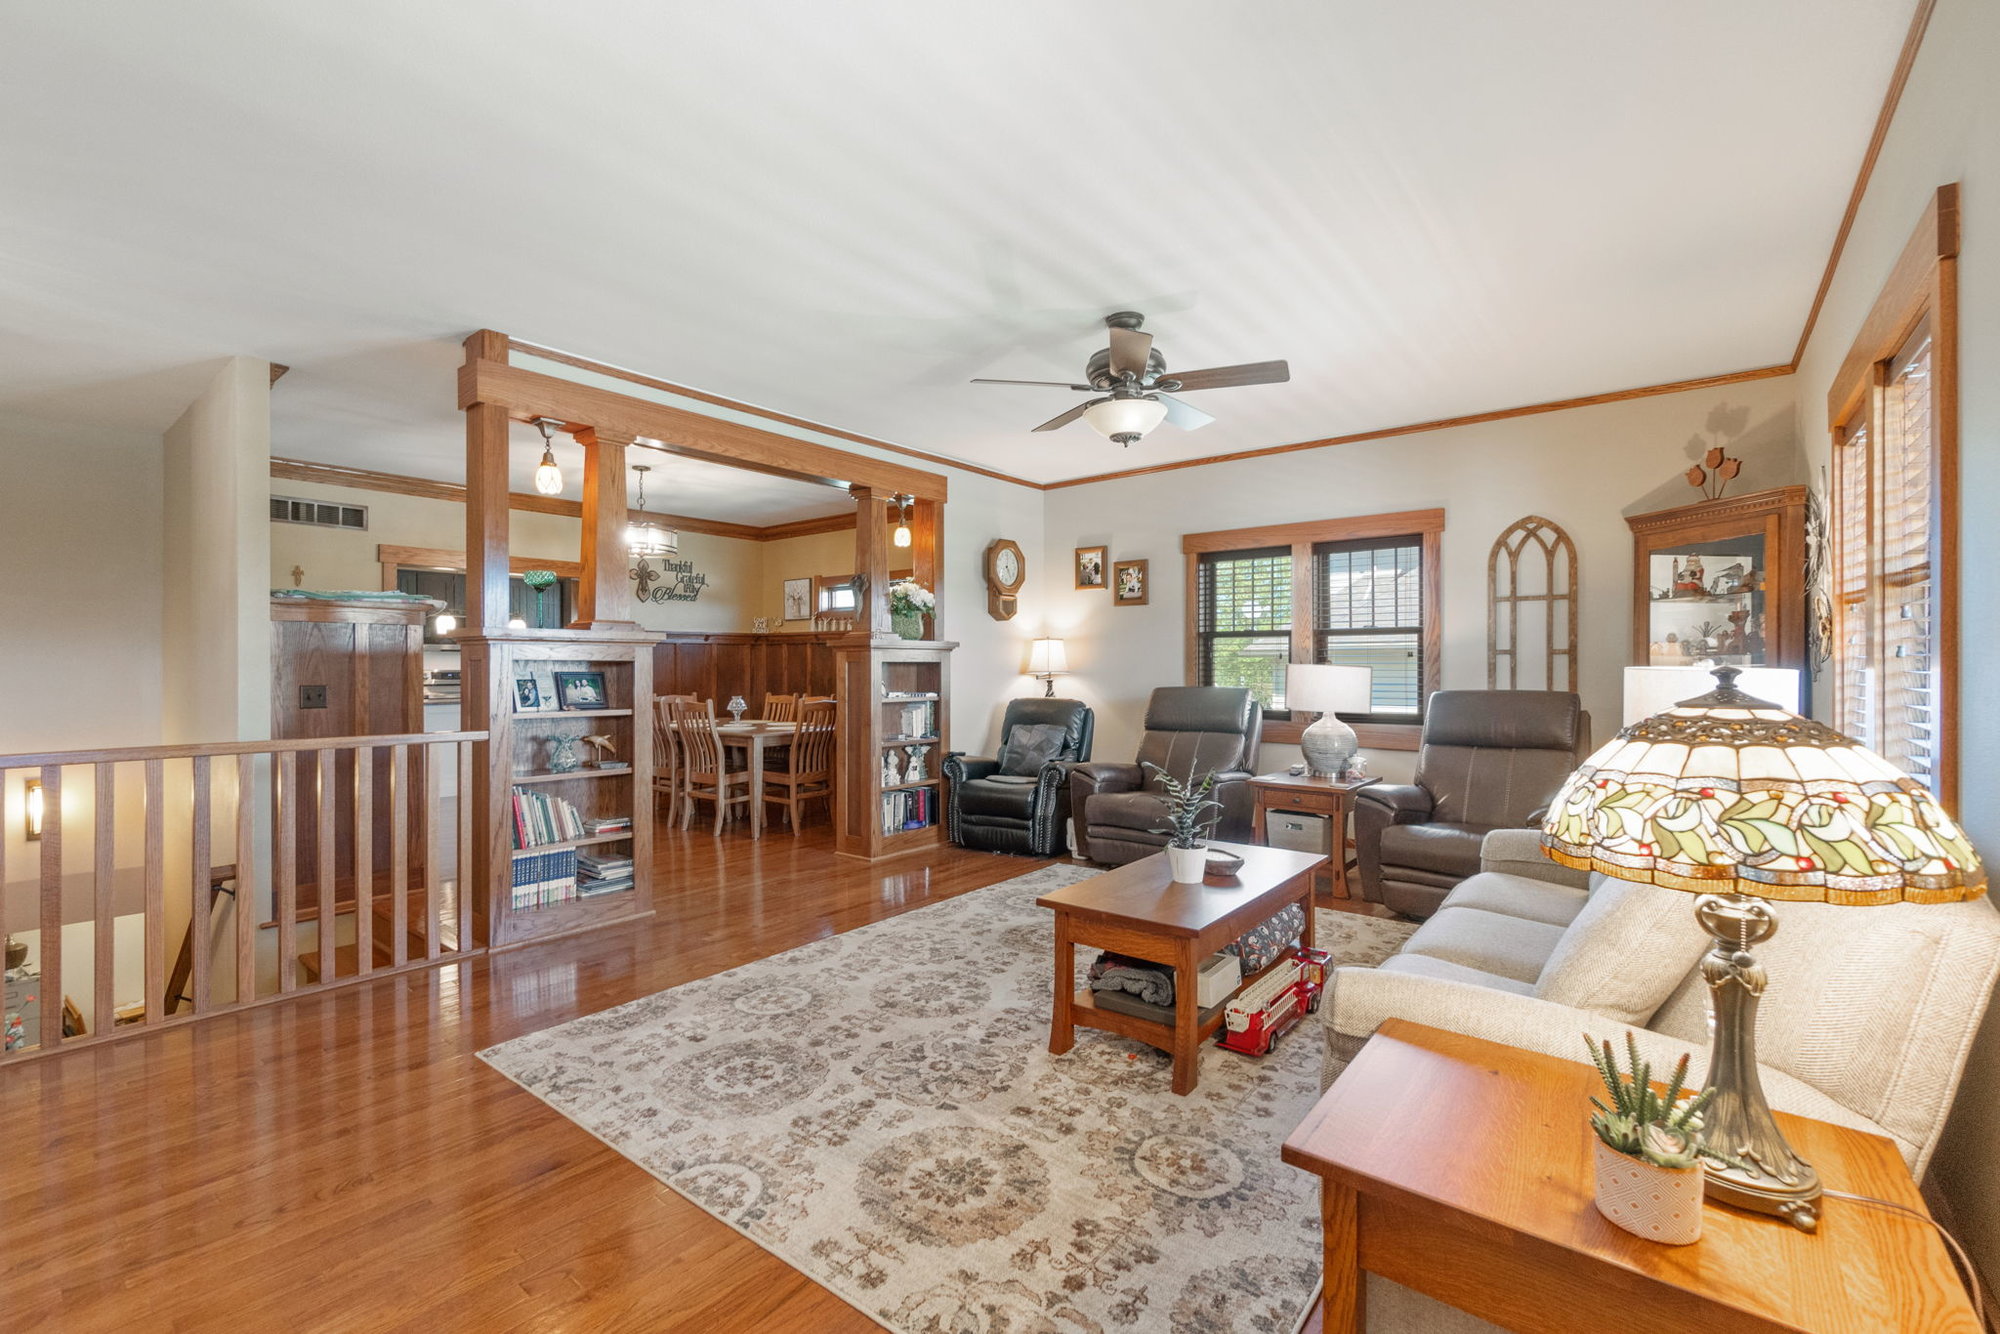 Beautiful Craftsman Style Can be Found in this Klunder Home in Reinbeck Iowa - 105 Valley Dr., Reinbeck